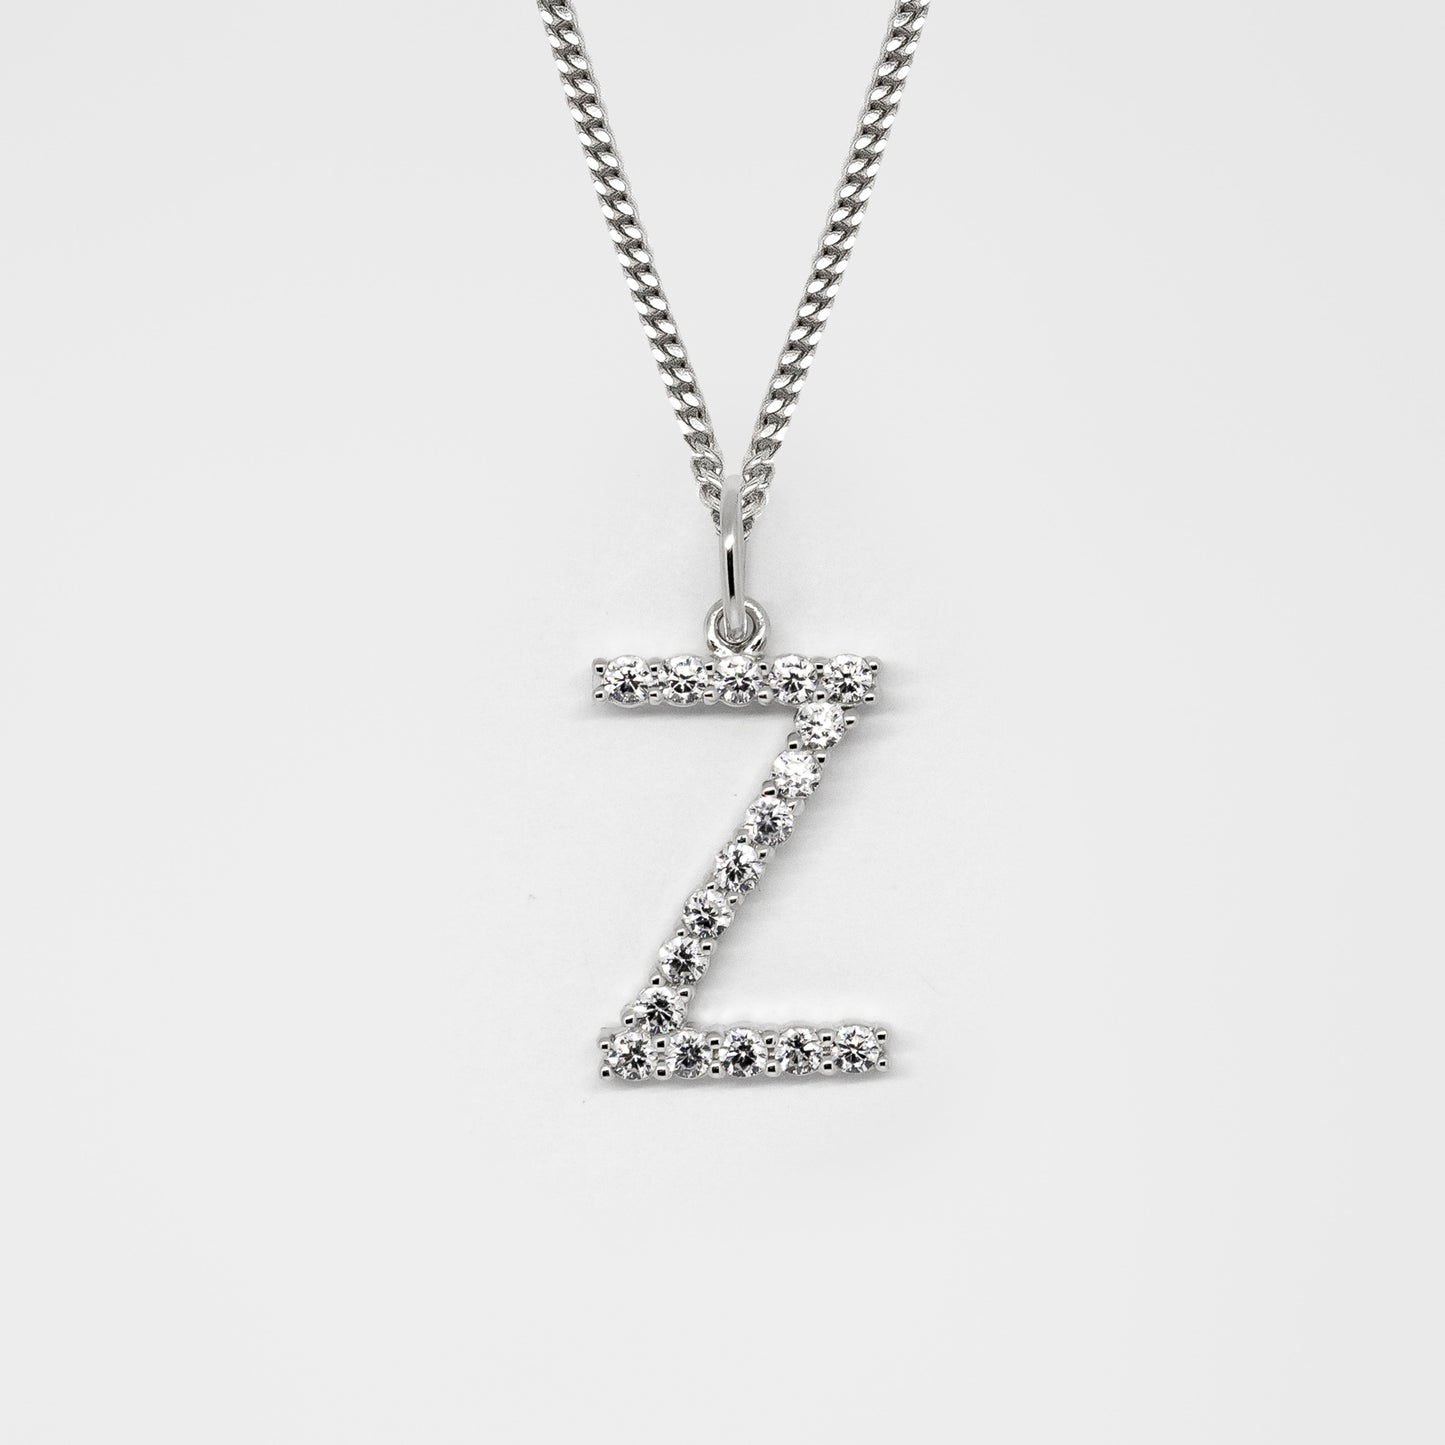 Silver 925 Initial Necklace - Z